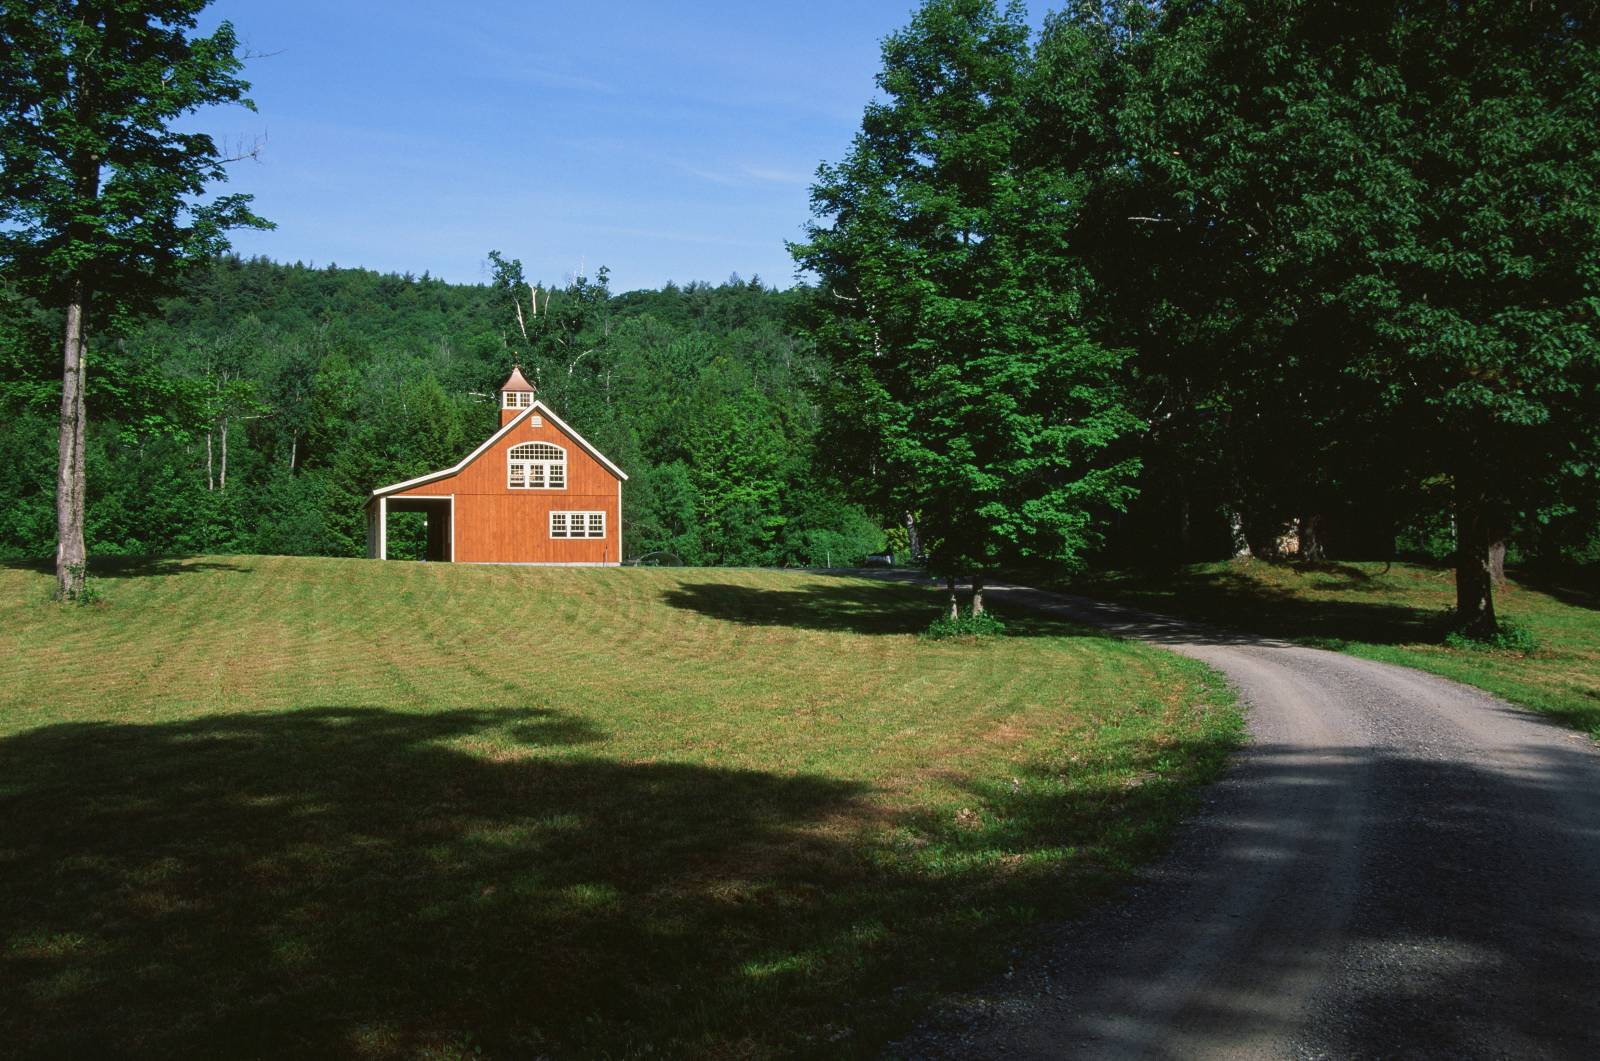 Down a sunny dirt road in New Hampshire is this beautiful Carriage Barn